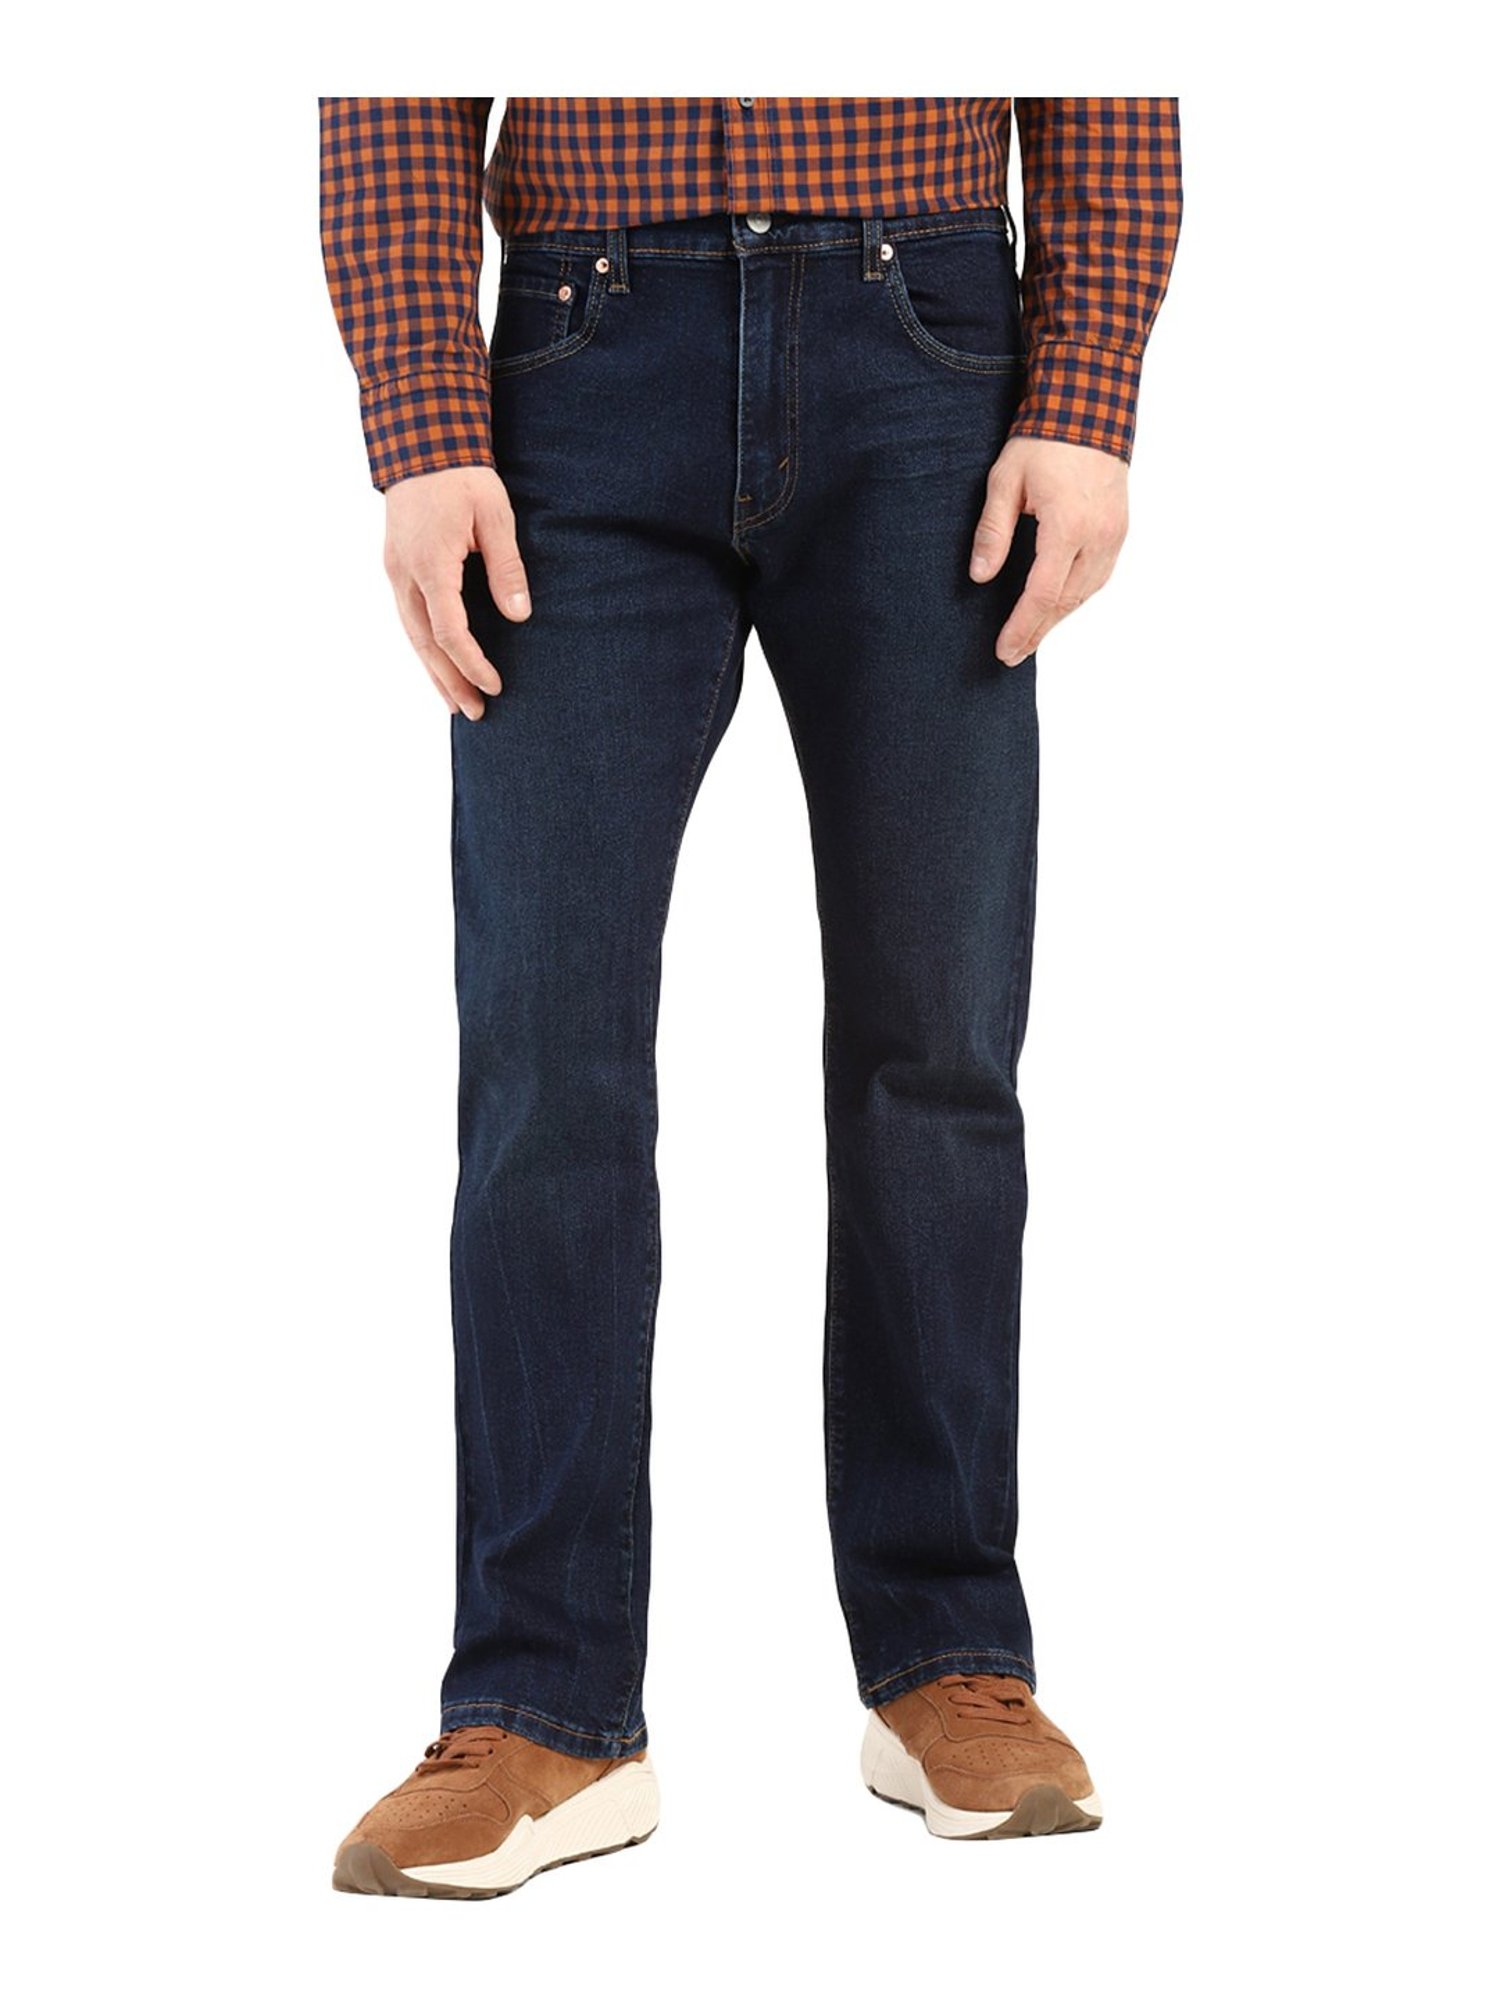 Levis Bootcut Jeans - Buy Levis Bootcut Jeans online in India